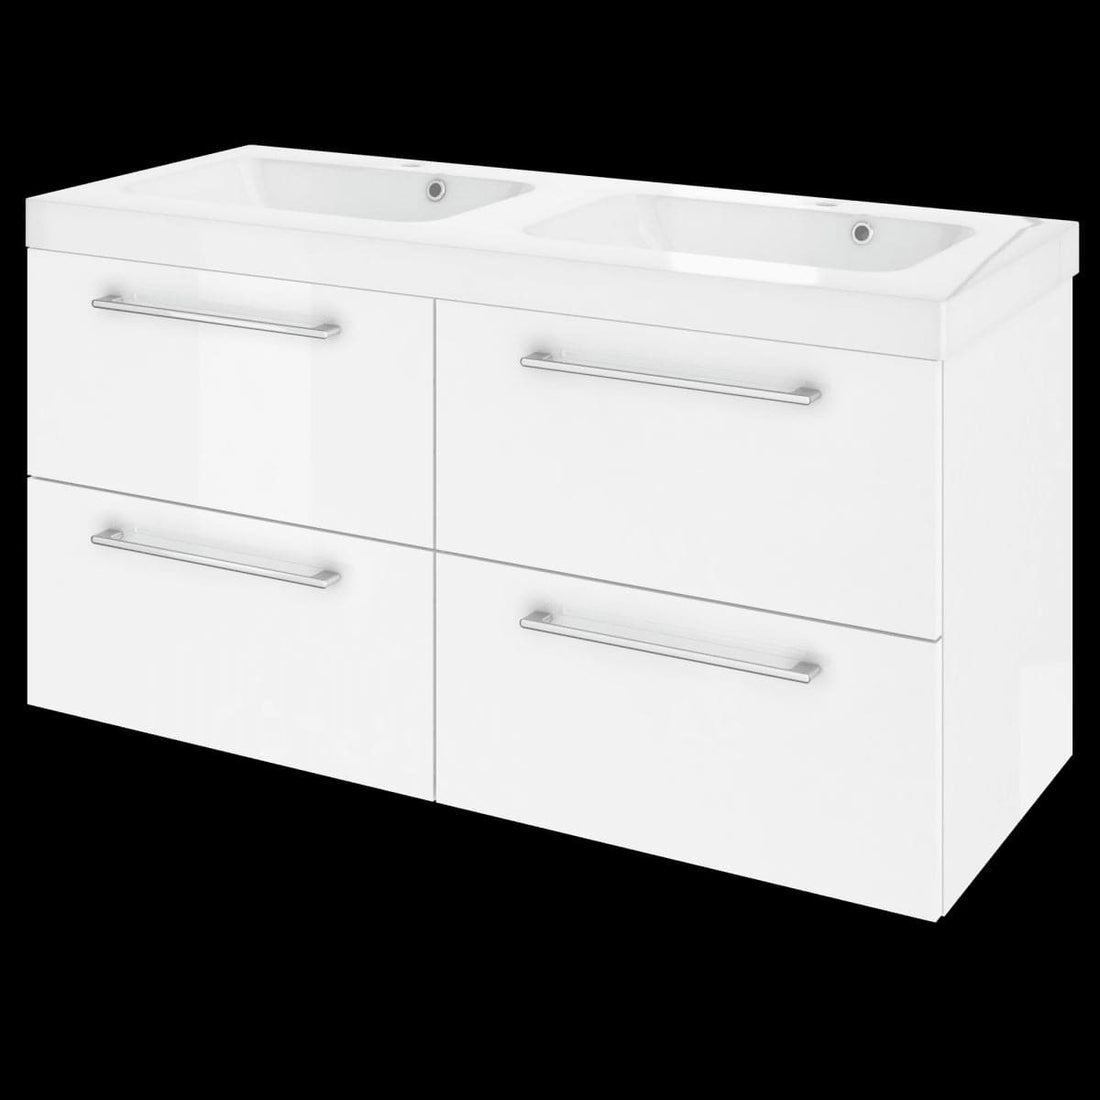 CABINET REMIX 120 4 DRAWERS GLOSSY WHITE W120 H58 D46 - best price from Maltashopper.com BR430008753